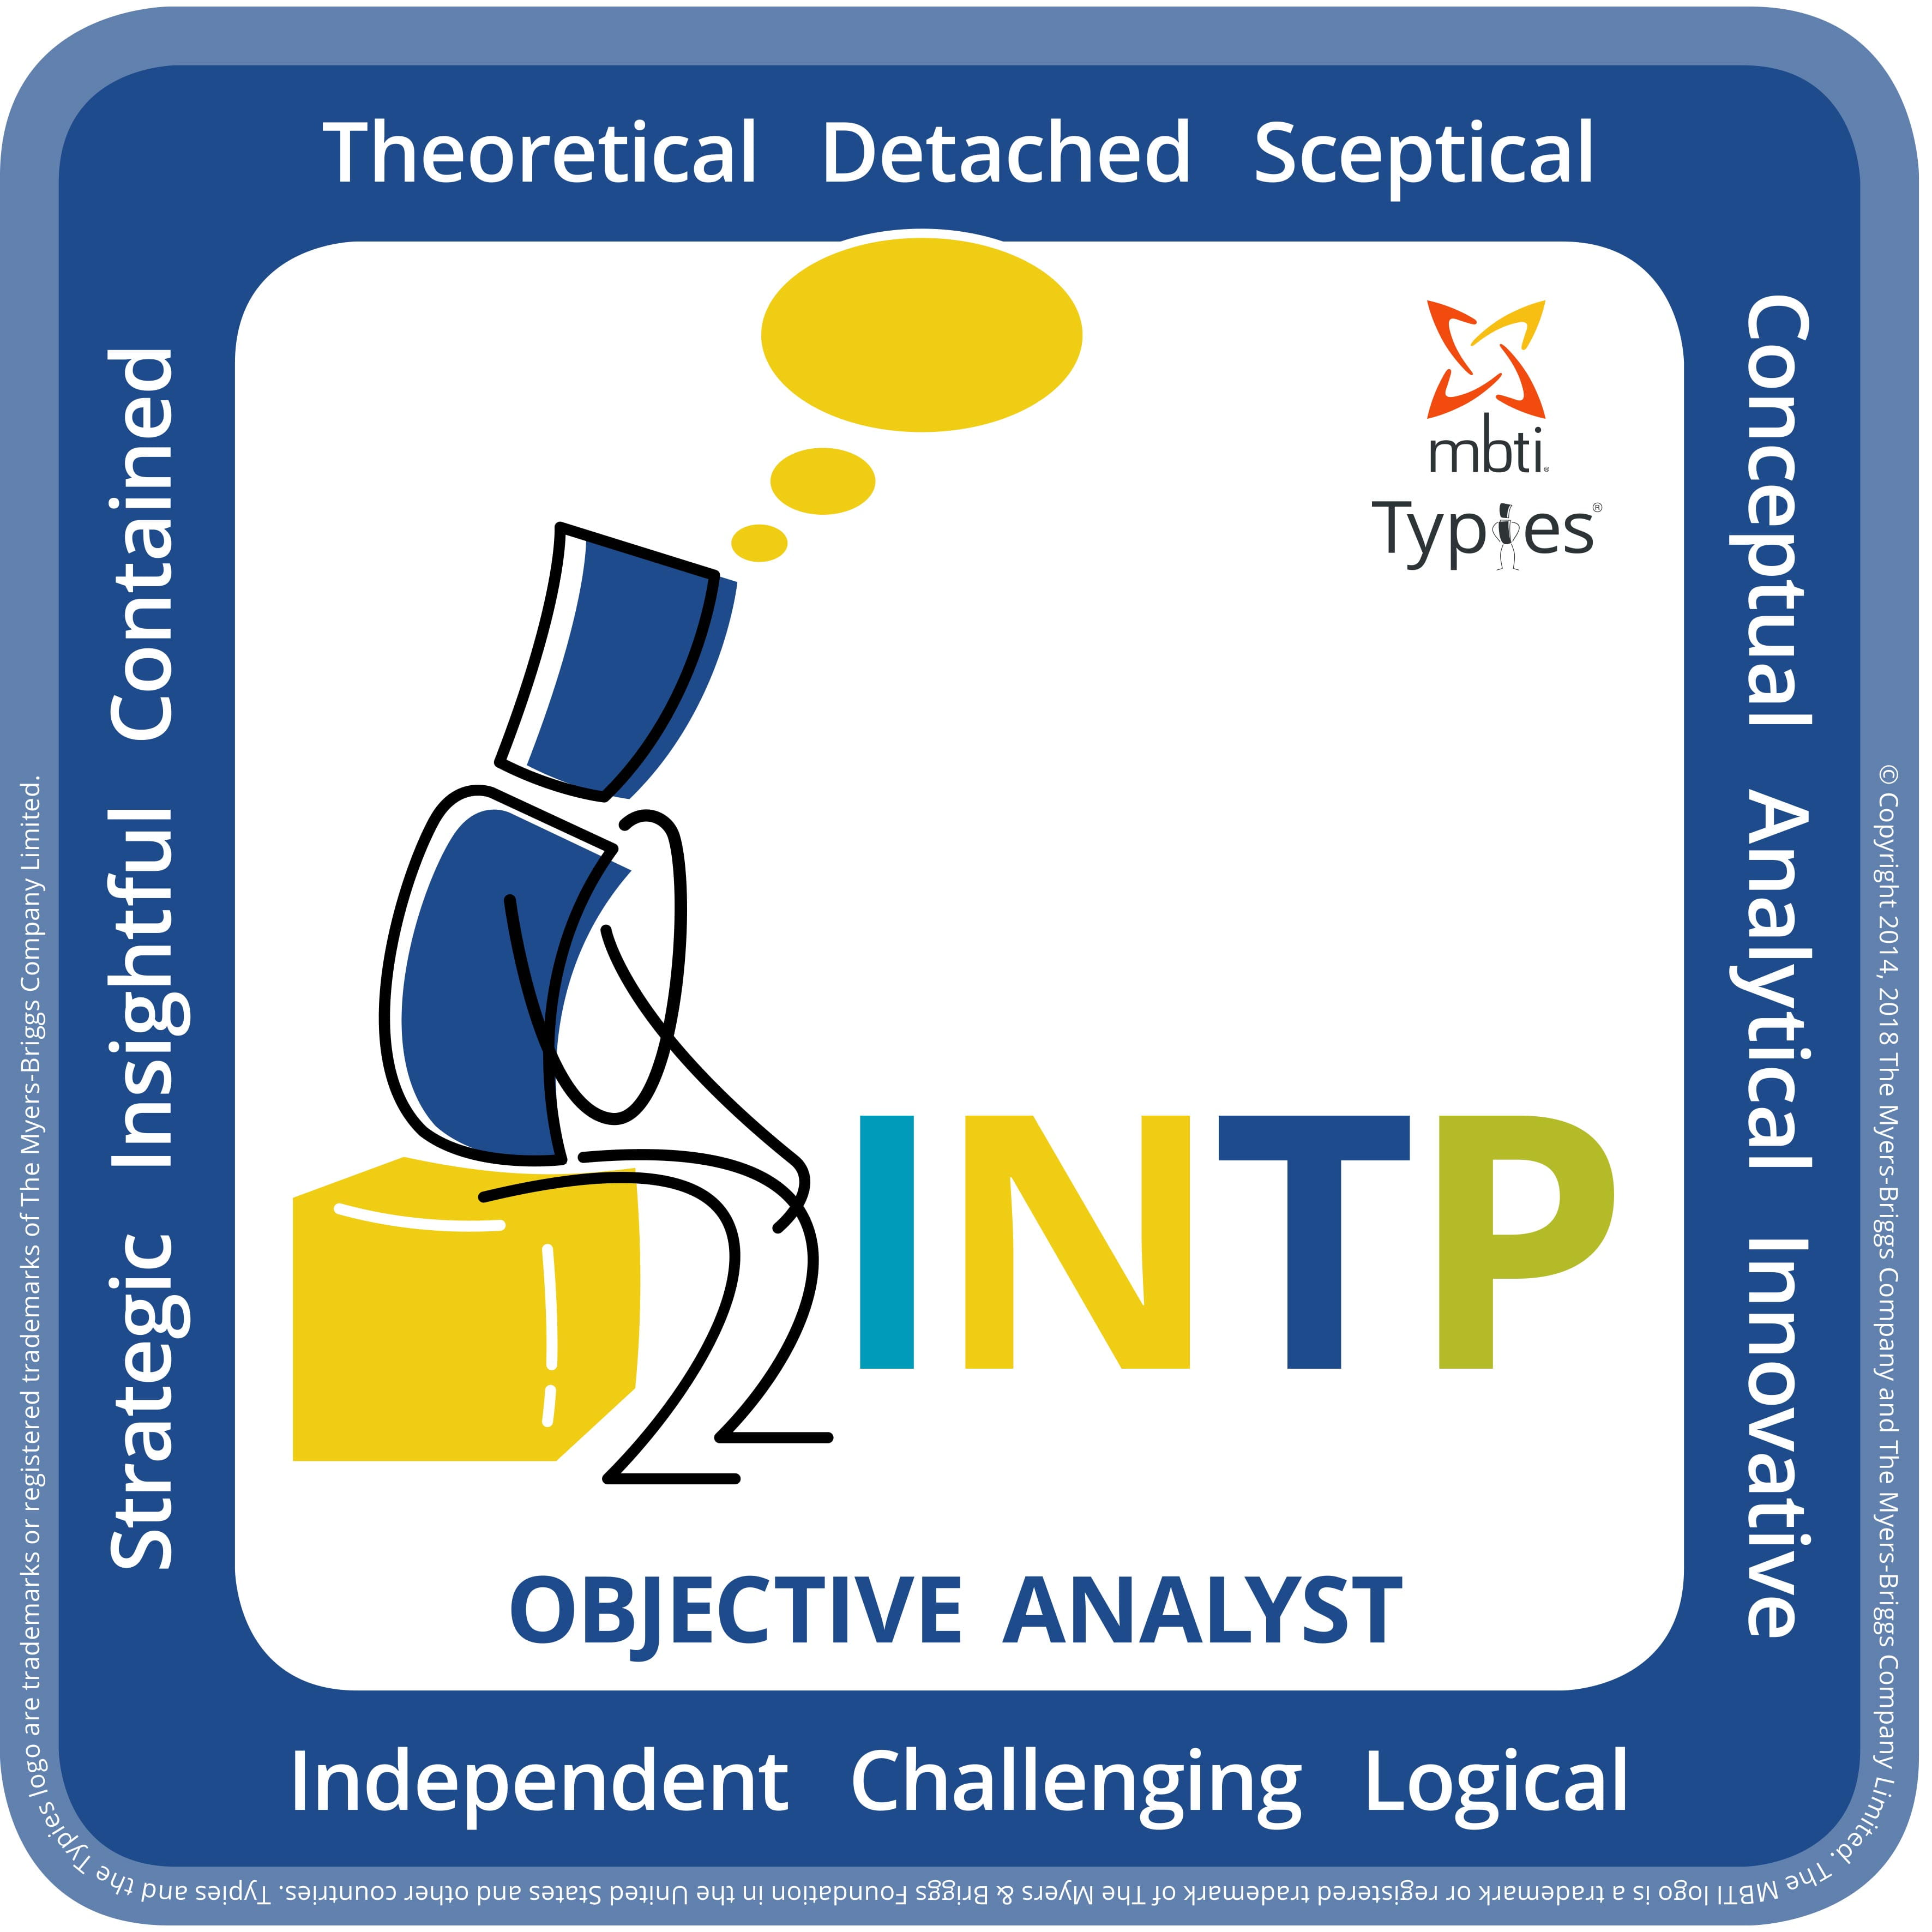 Typical characteristics of an INTP